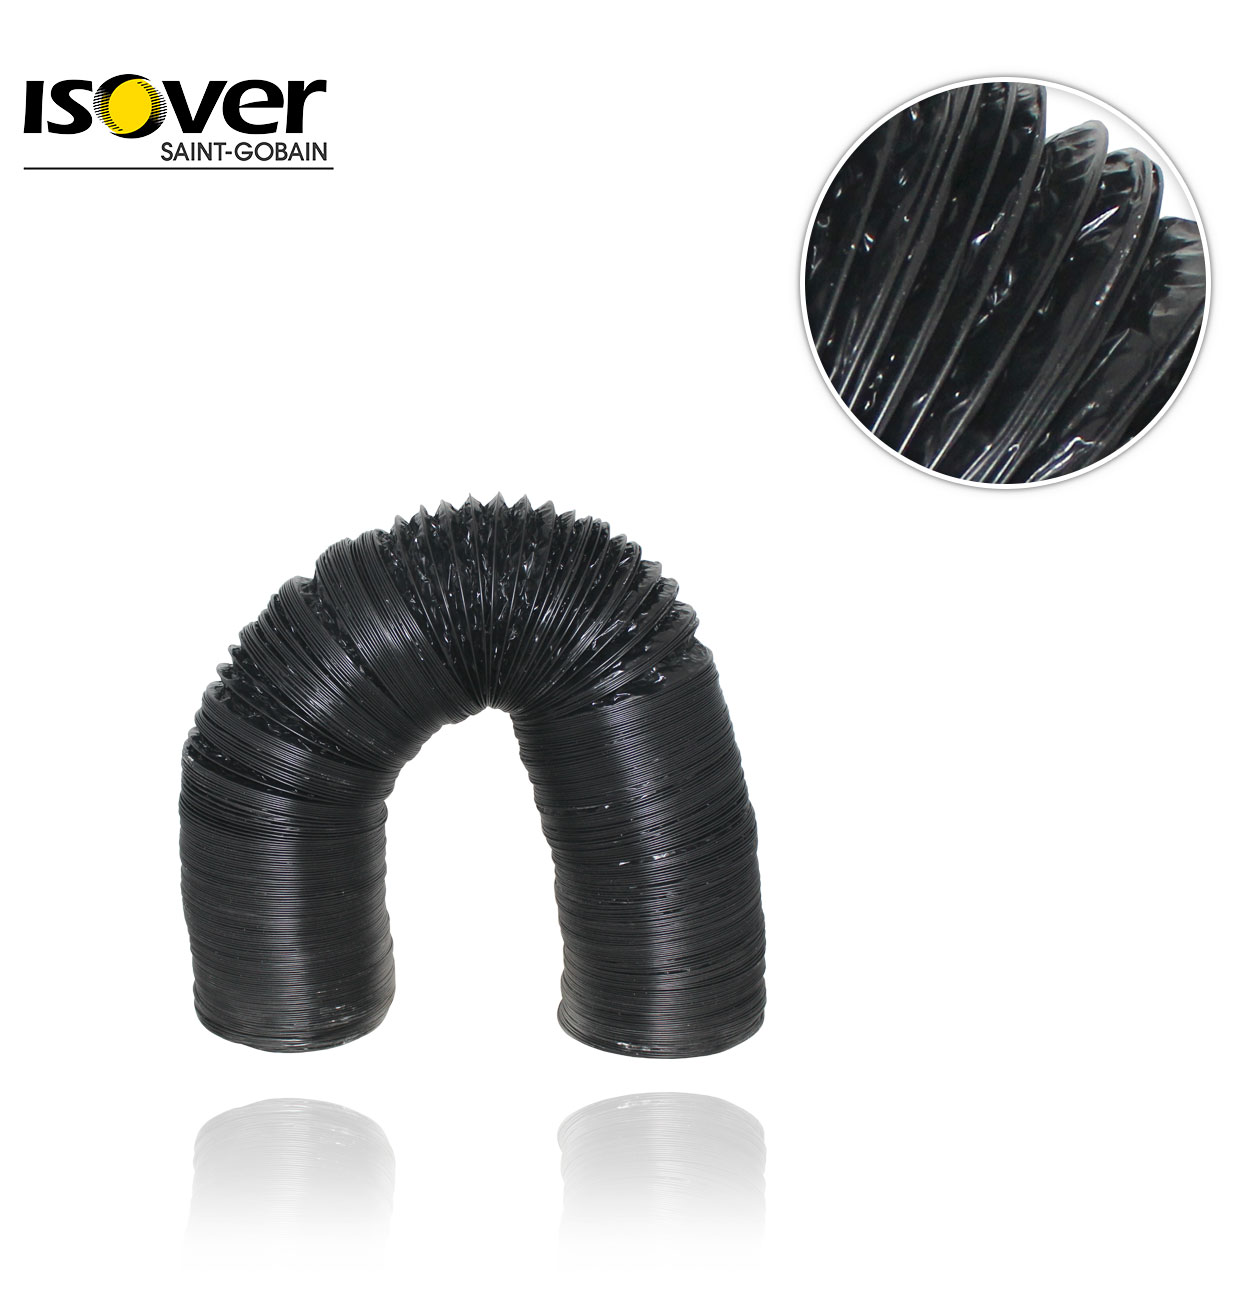 102ml FLEXIVER HOSE WITH BLACK PROTECTOR